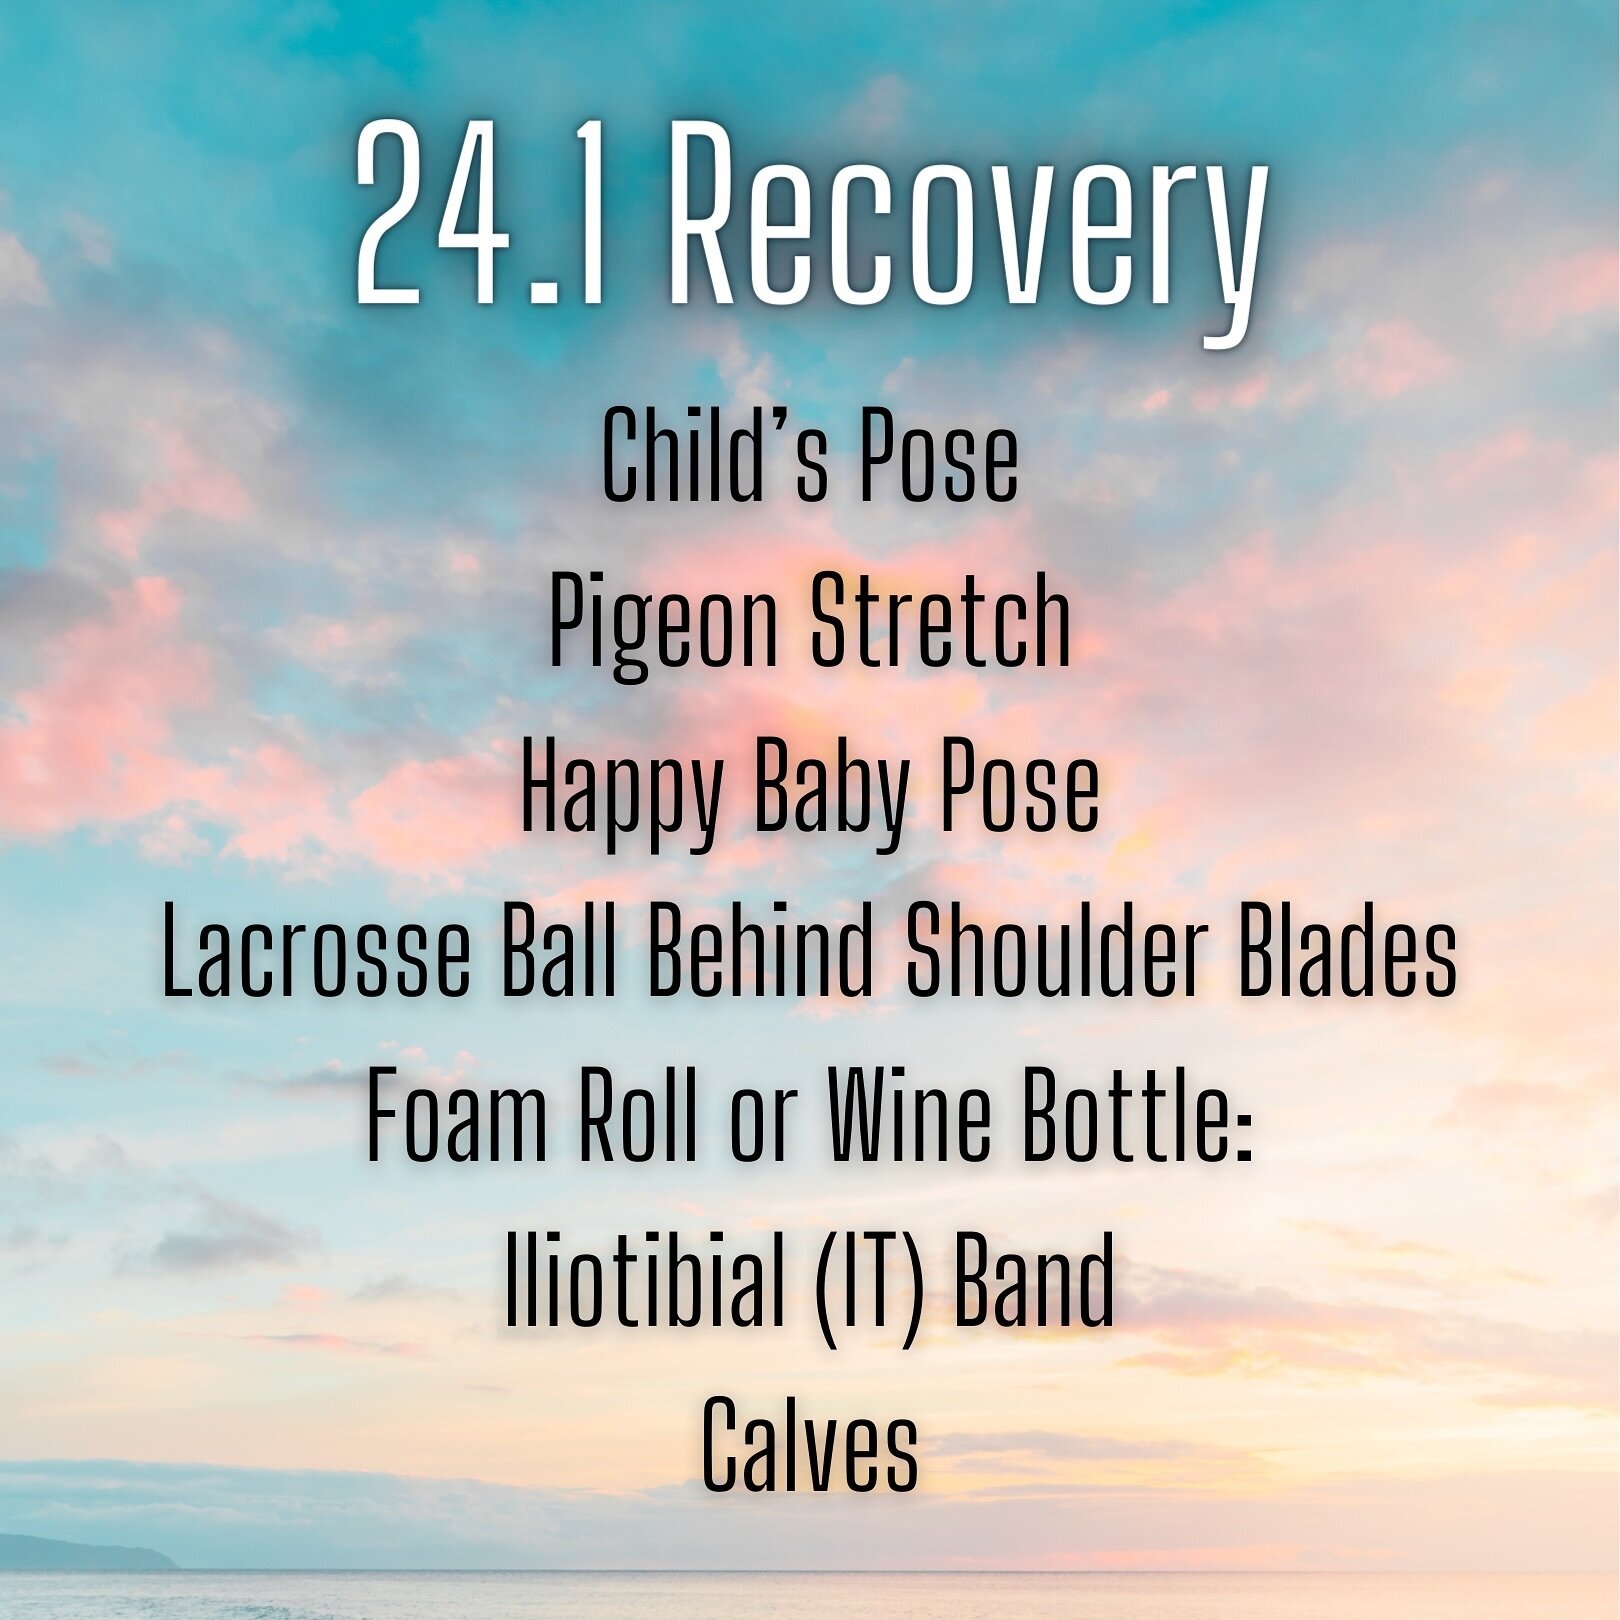 Amazing job on 24.1 last night! Now it&rsquo;s time to restore your body and get ready for next week&rsquo;s workout (or a re-do 😬?).

Please make sure you build some active recovery into your day. Spend 20 minutes this morning on these suggested ex